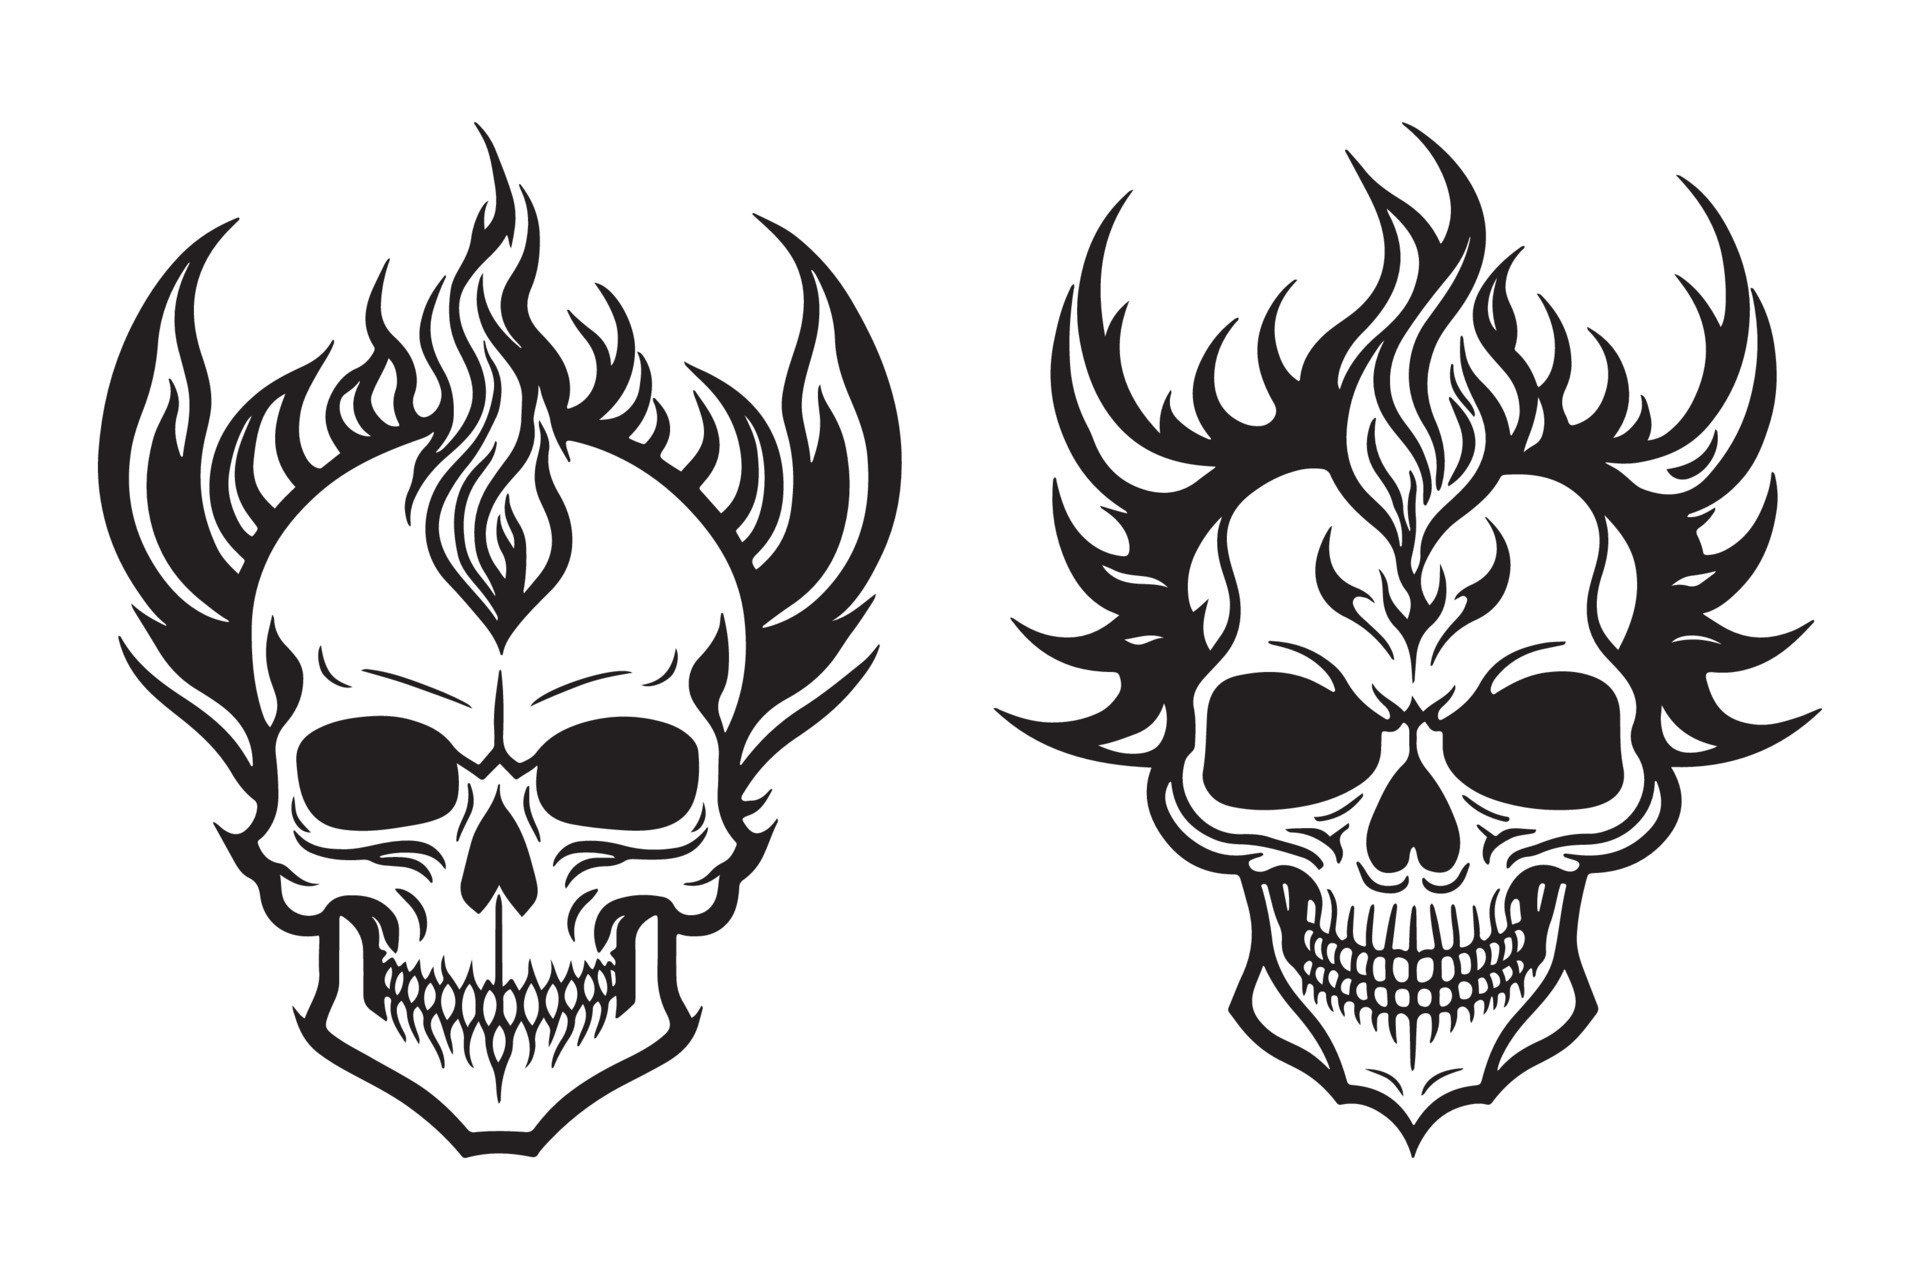 Transparent White Flame Png  Tribal Tattoo Designs Fire Png Download   572x7886908454  PngFind